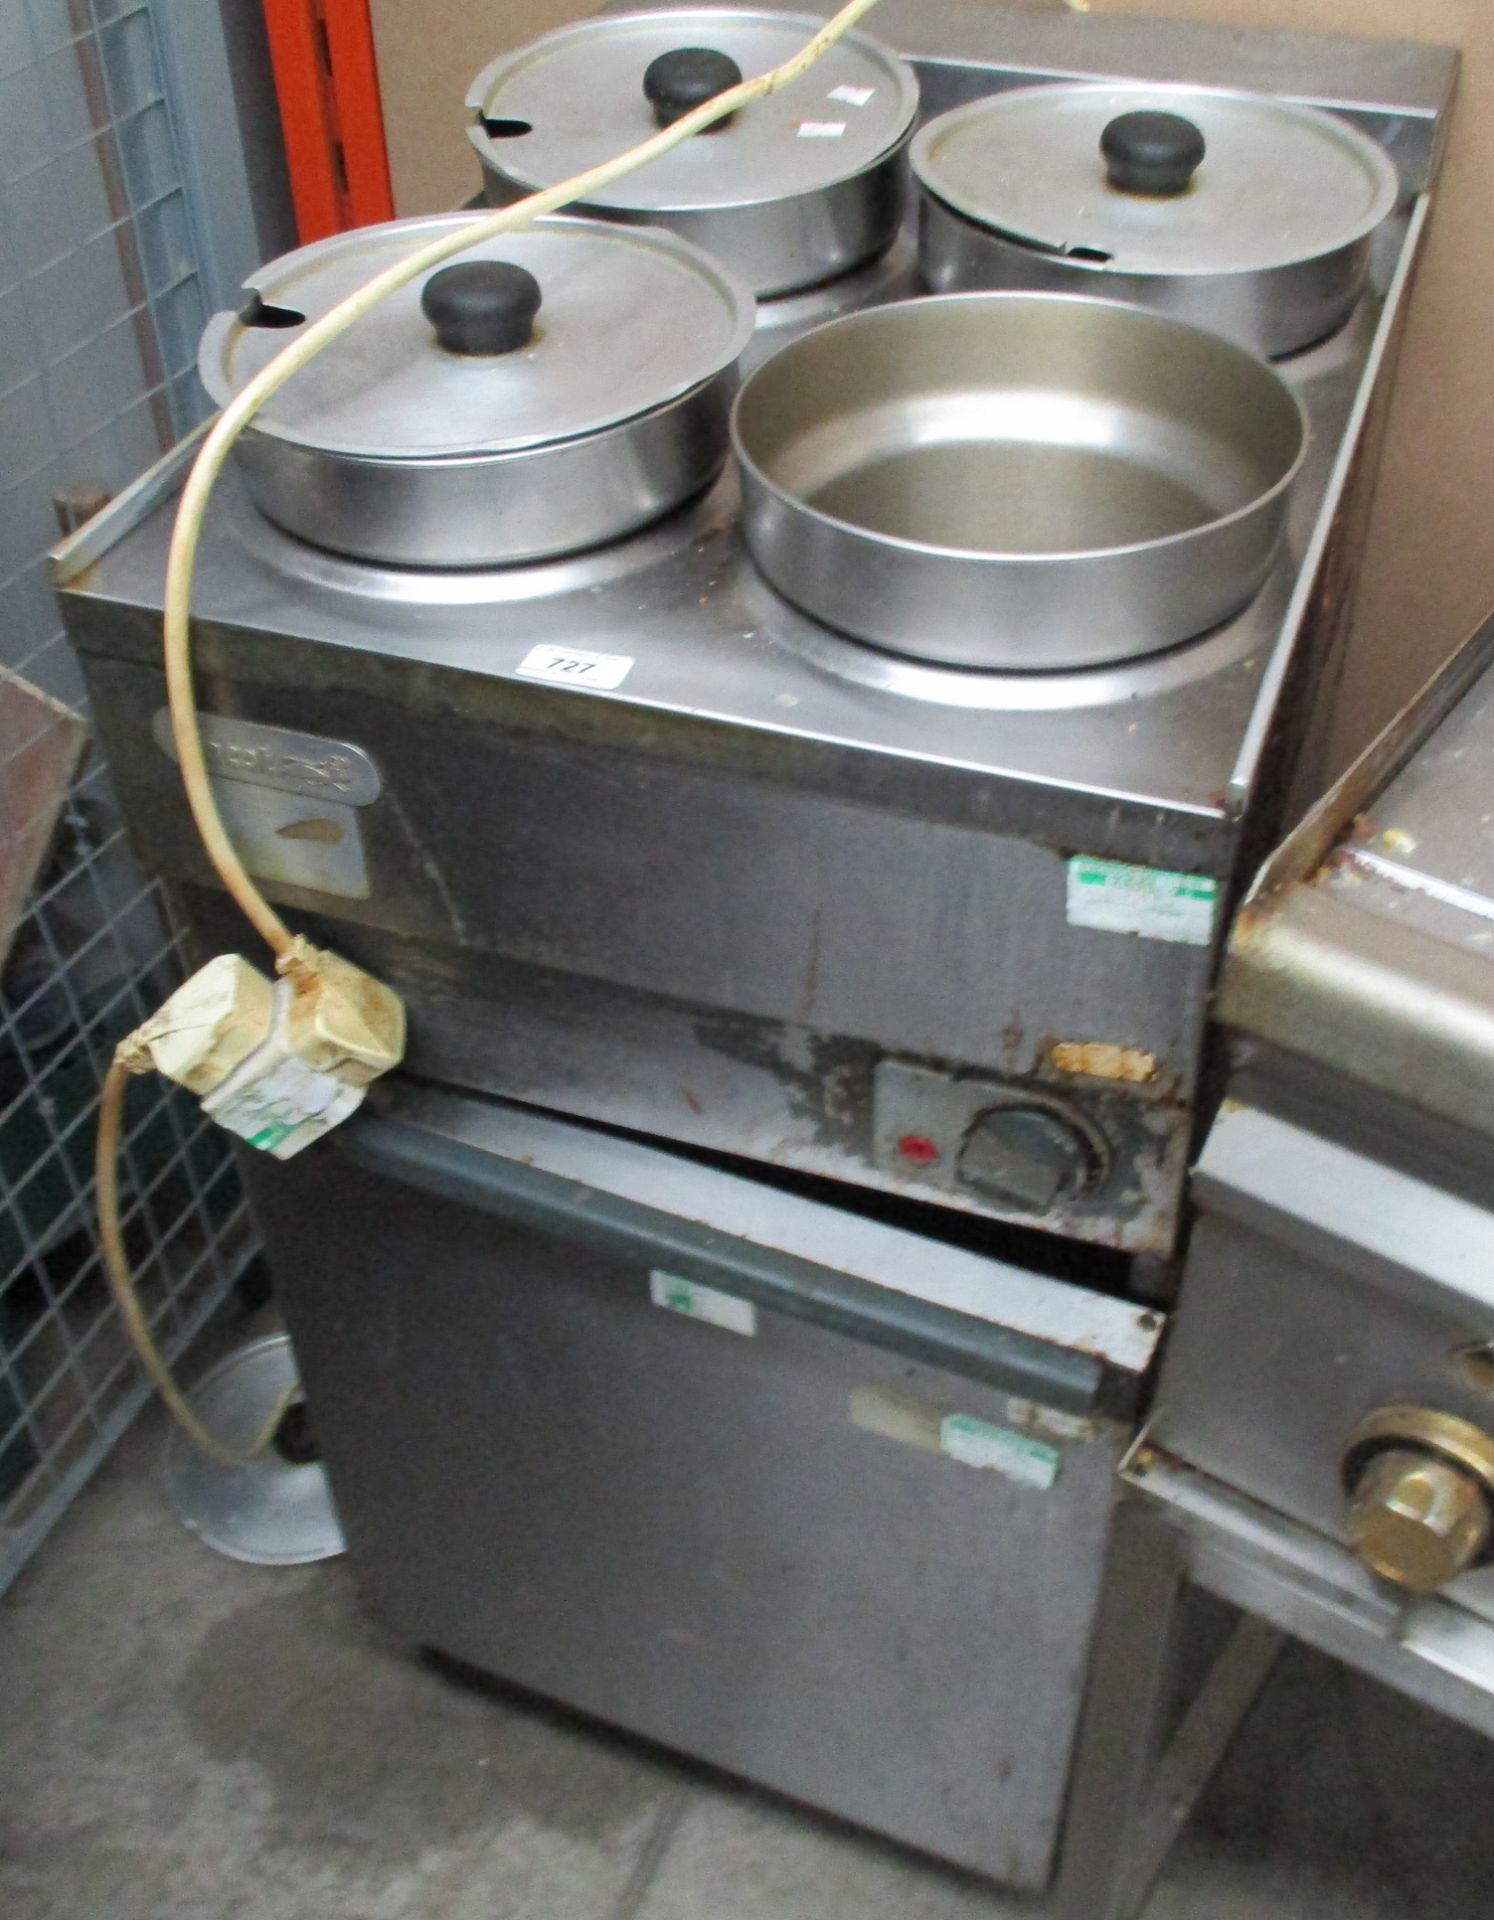 A Lincat stainless steel four pan bain marie with heated storage cabinet 240v (failed earth test)